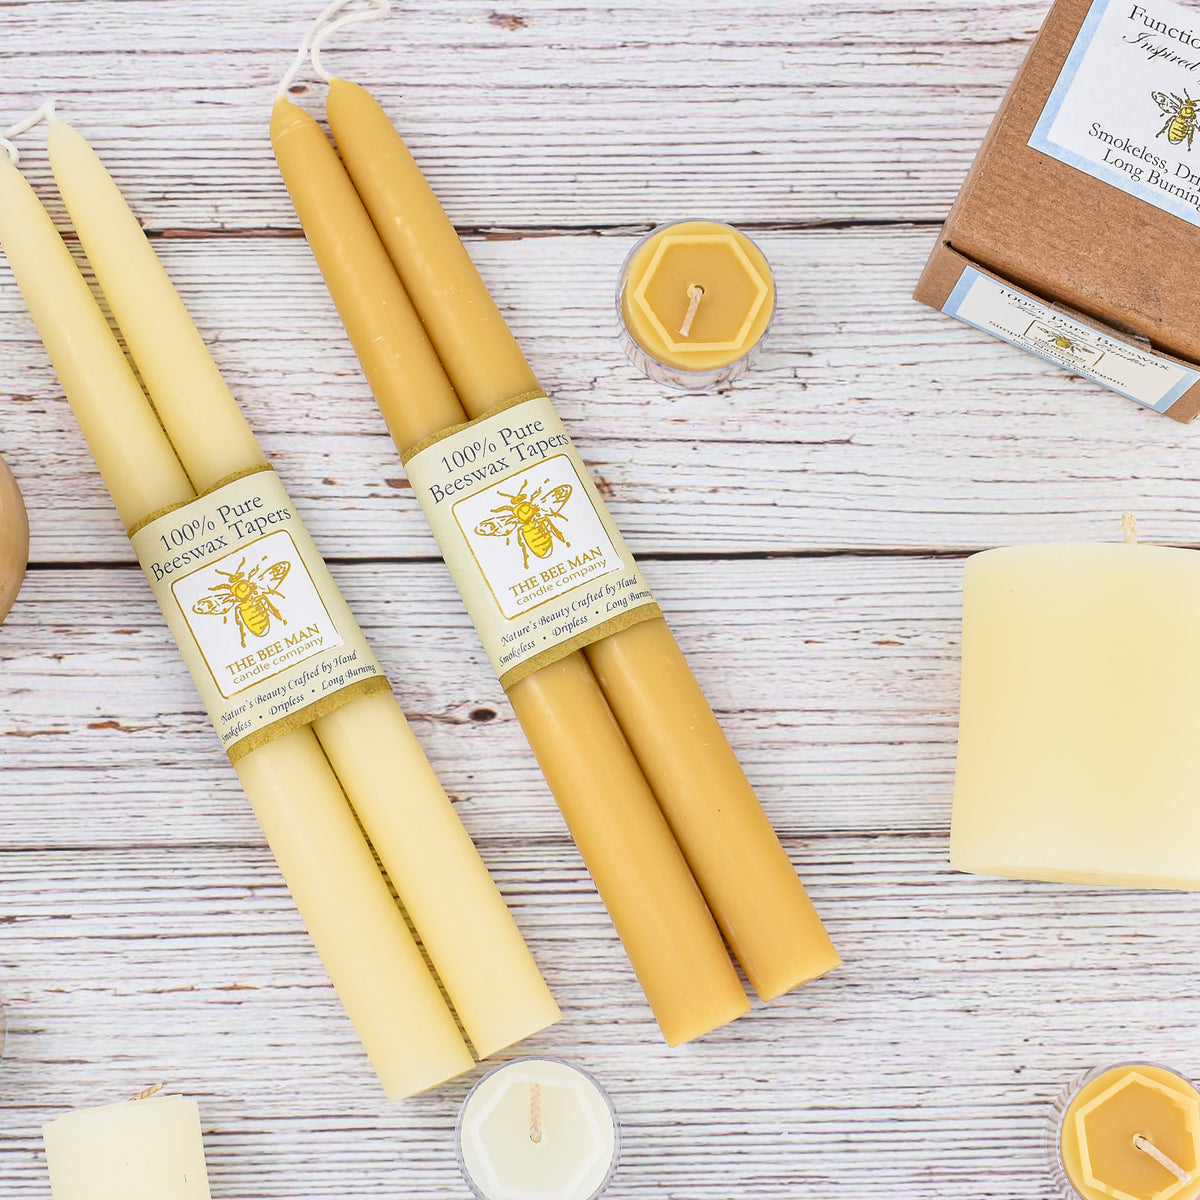 Bluecorn Beeswax 100% Pure Beeswax Pillar Candles | Natural Beeswax  Candles, Unscented Yellow Candles | Soy, Paraffin, & Fragrance Free | 3x6,  90 Hour